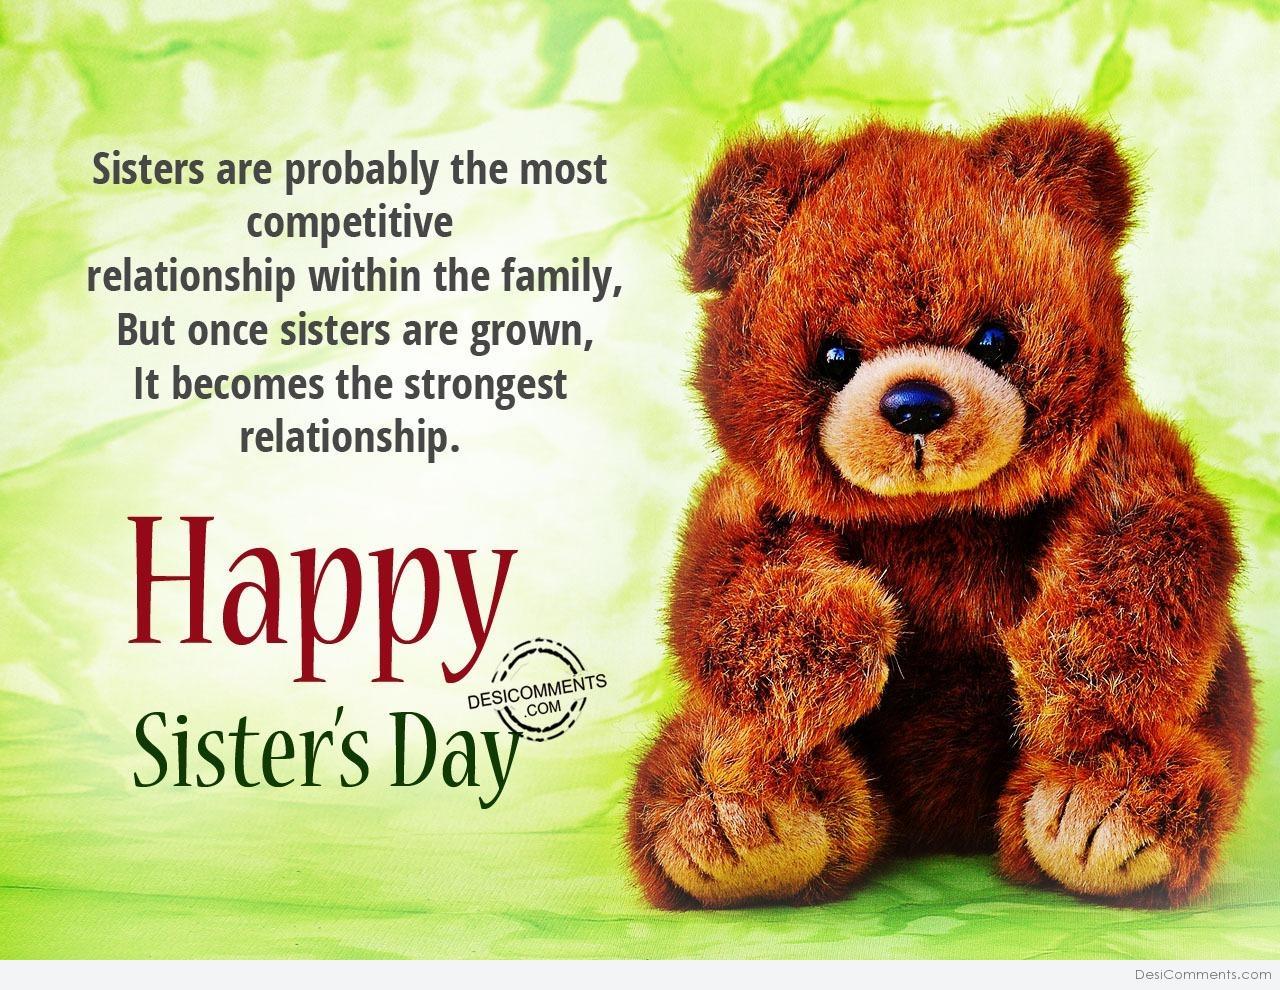 happy Sister’s Day wishes